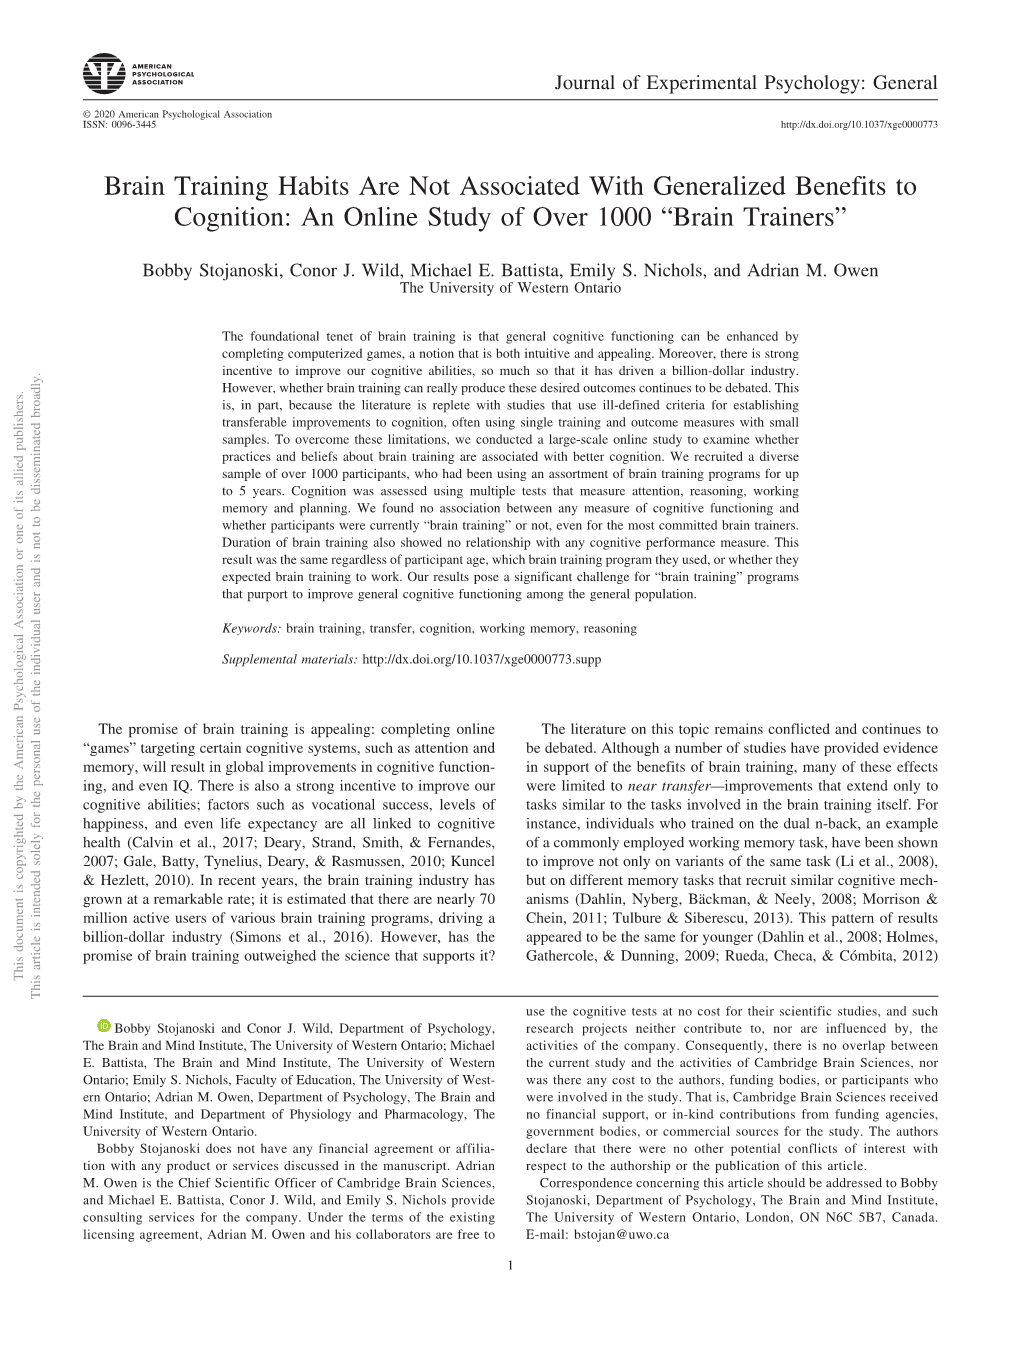 Brain Training Habits Are Not Associated with Generalized Benefits to Cognition: an Online Study of Over 1000 “Brain Trainers”